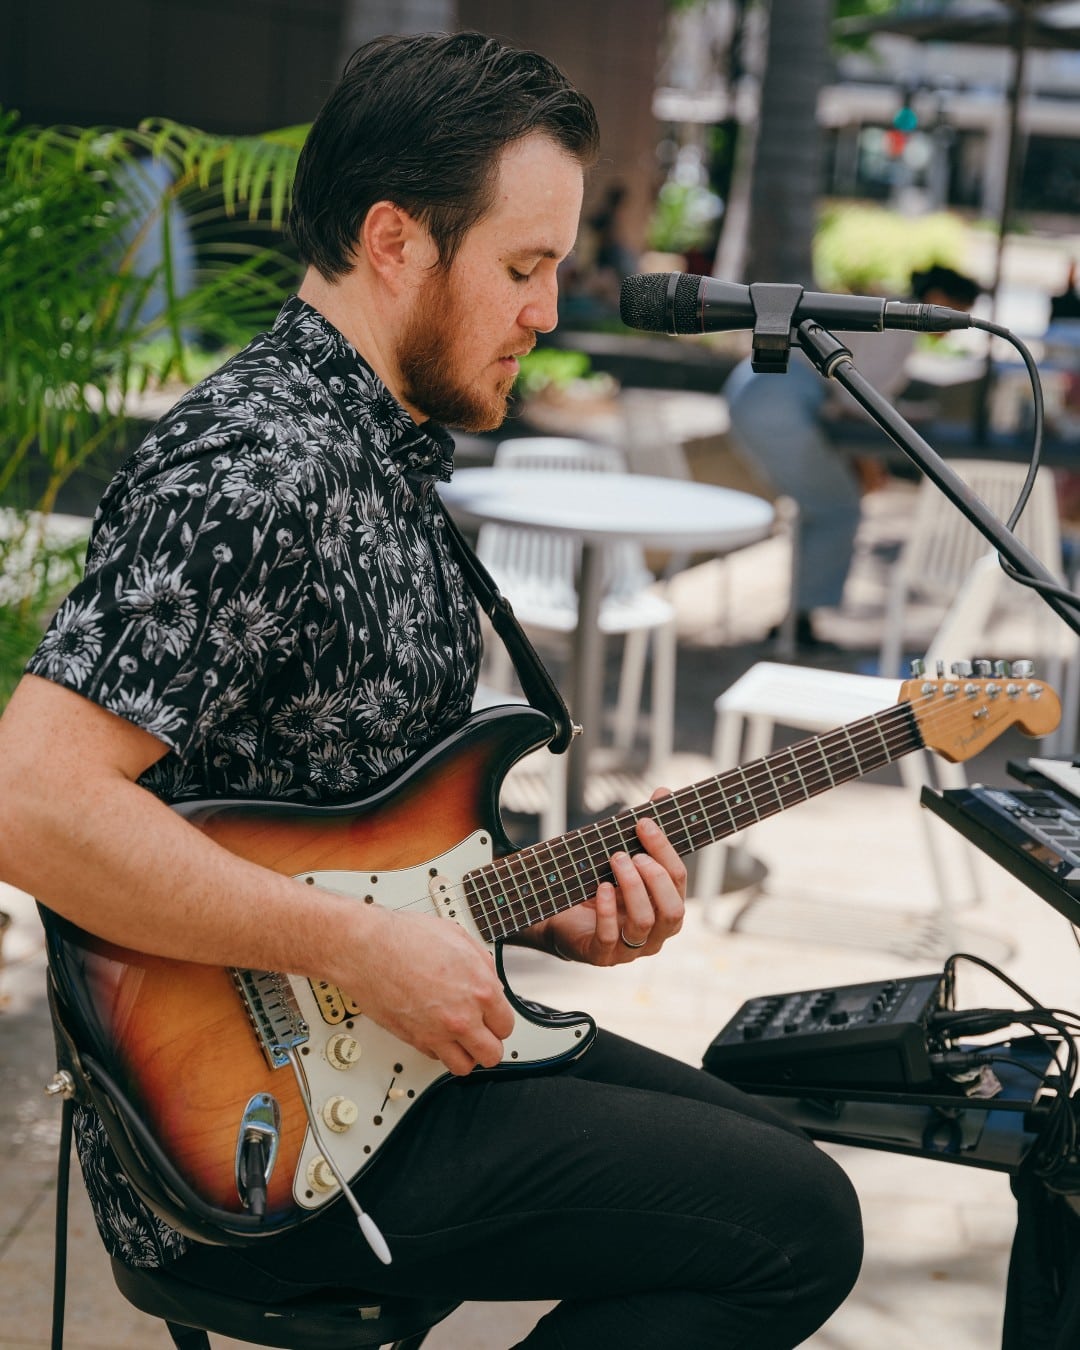 Grab lunch from one of our neighborhood eateries, sit back, and enjoy the sounds of summer at the final event of our Aloha Friday Music Series. Join us Friday, July 28 from 12pm - 1pm in the South Shore Market courtyard with live music by Sean Cleland.